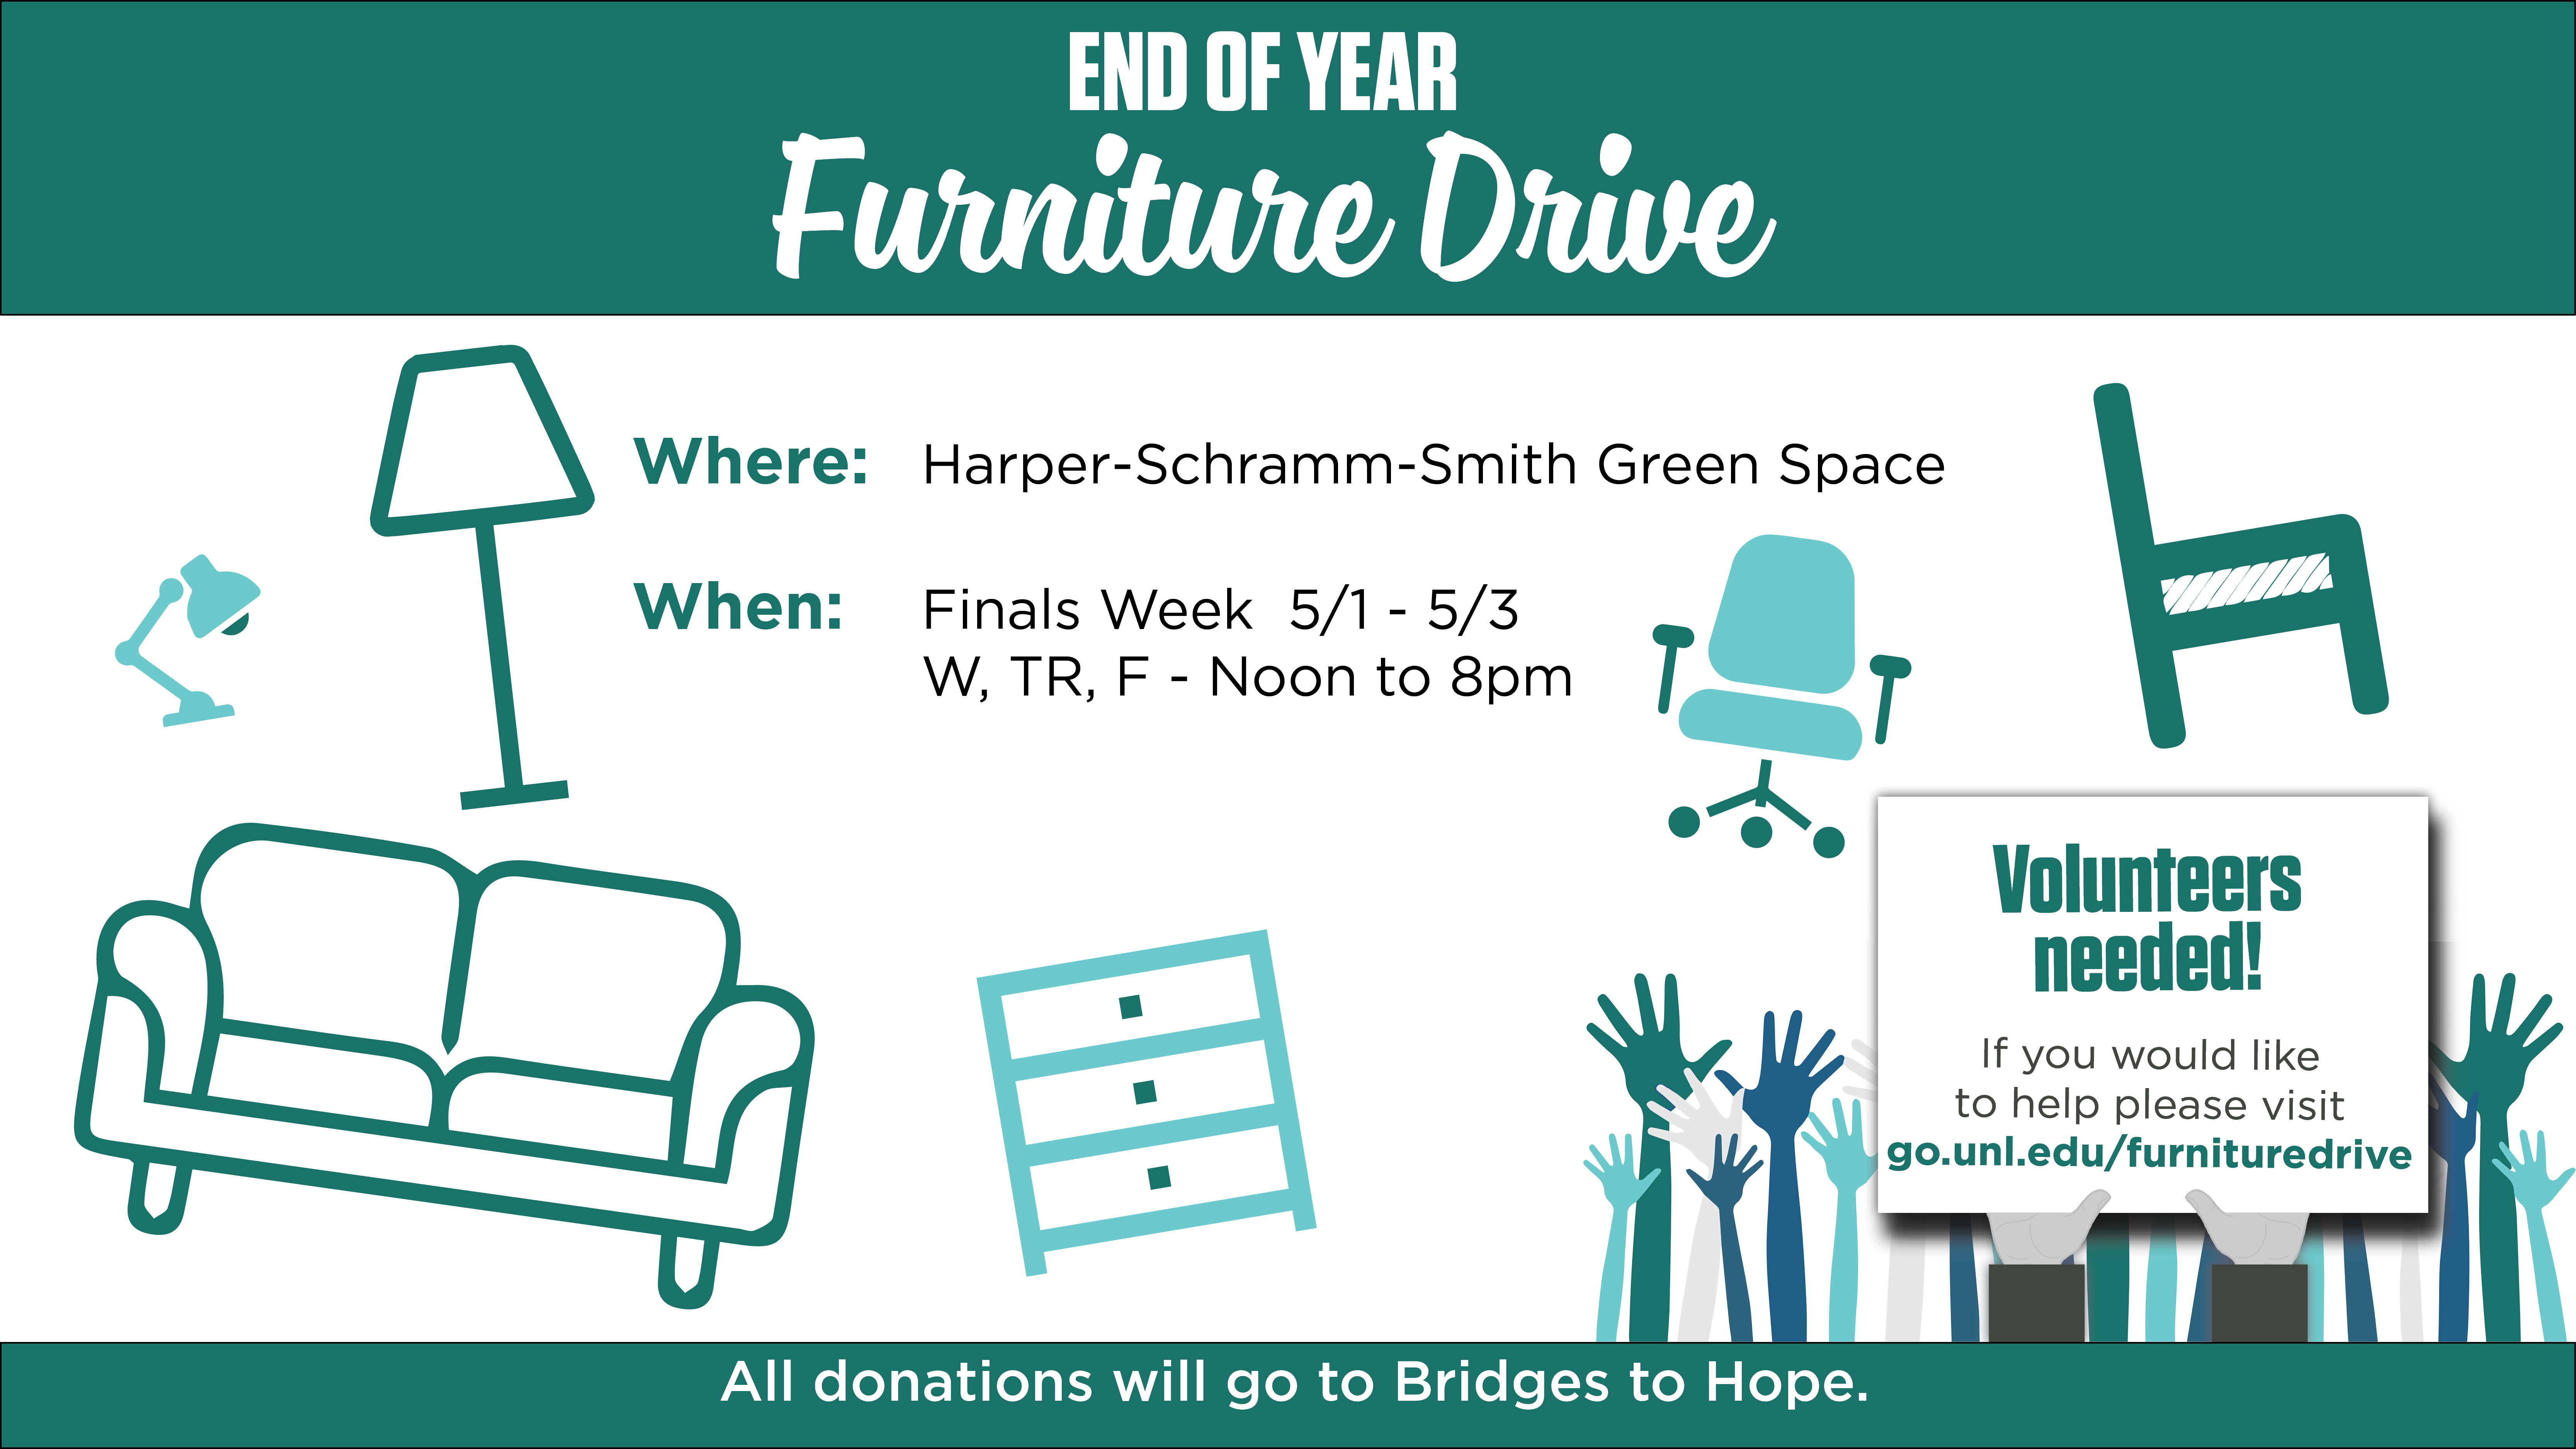 Official event flyer for the furniture drive